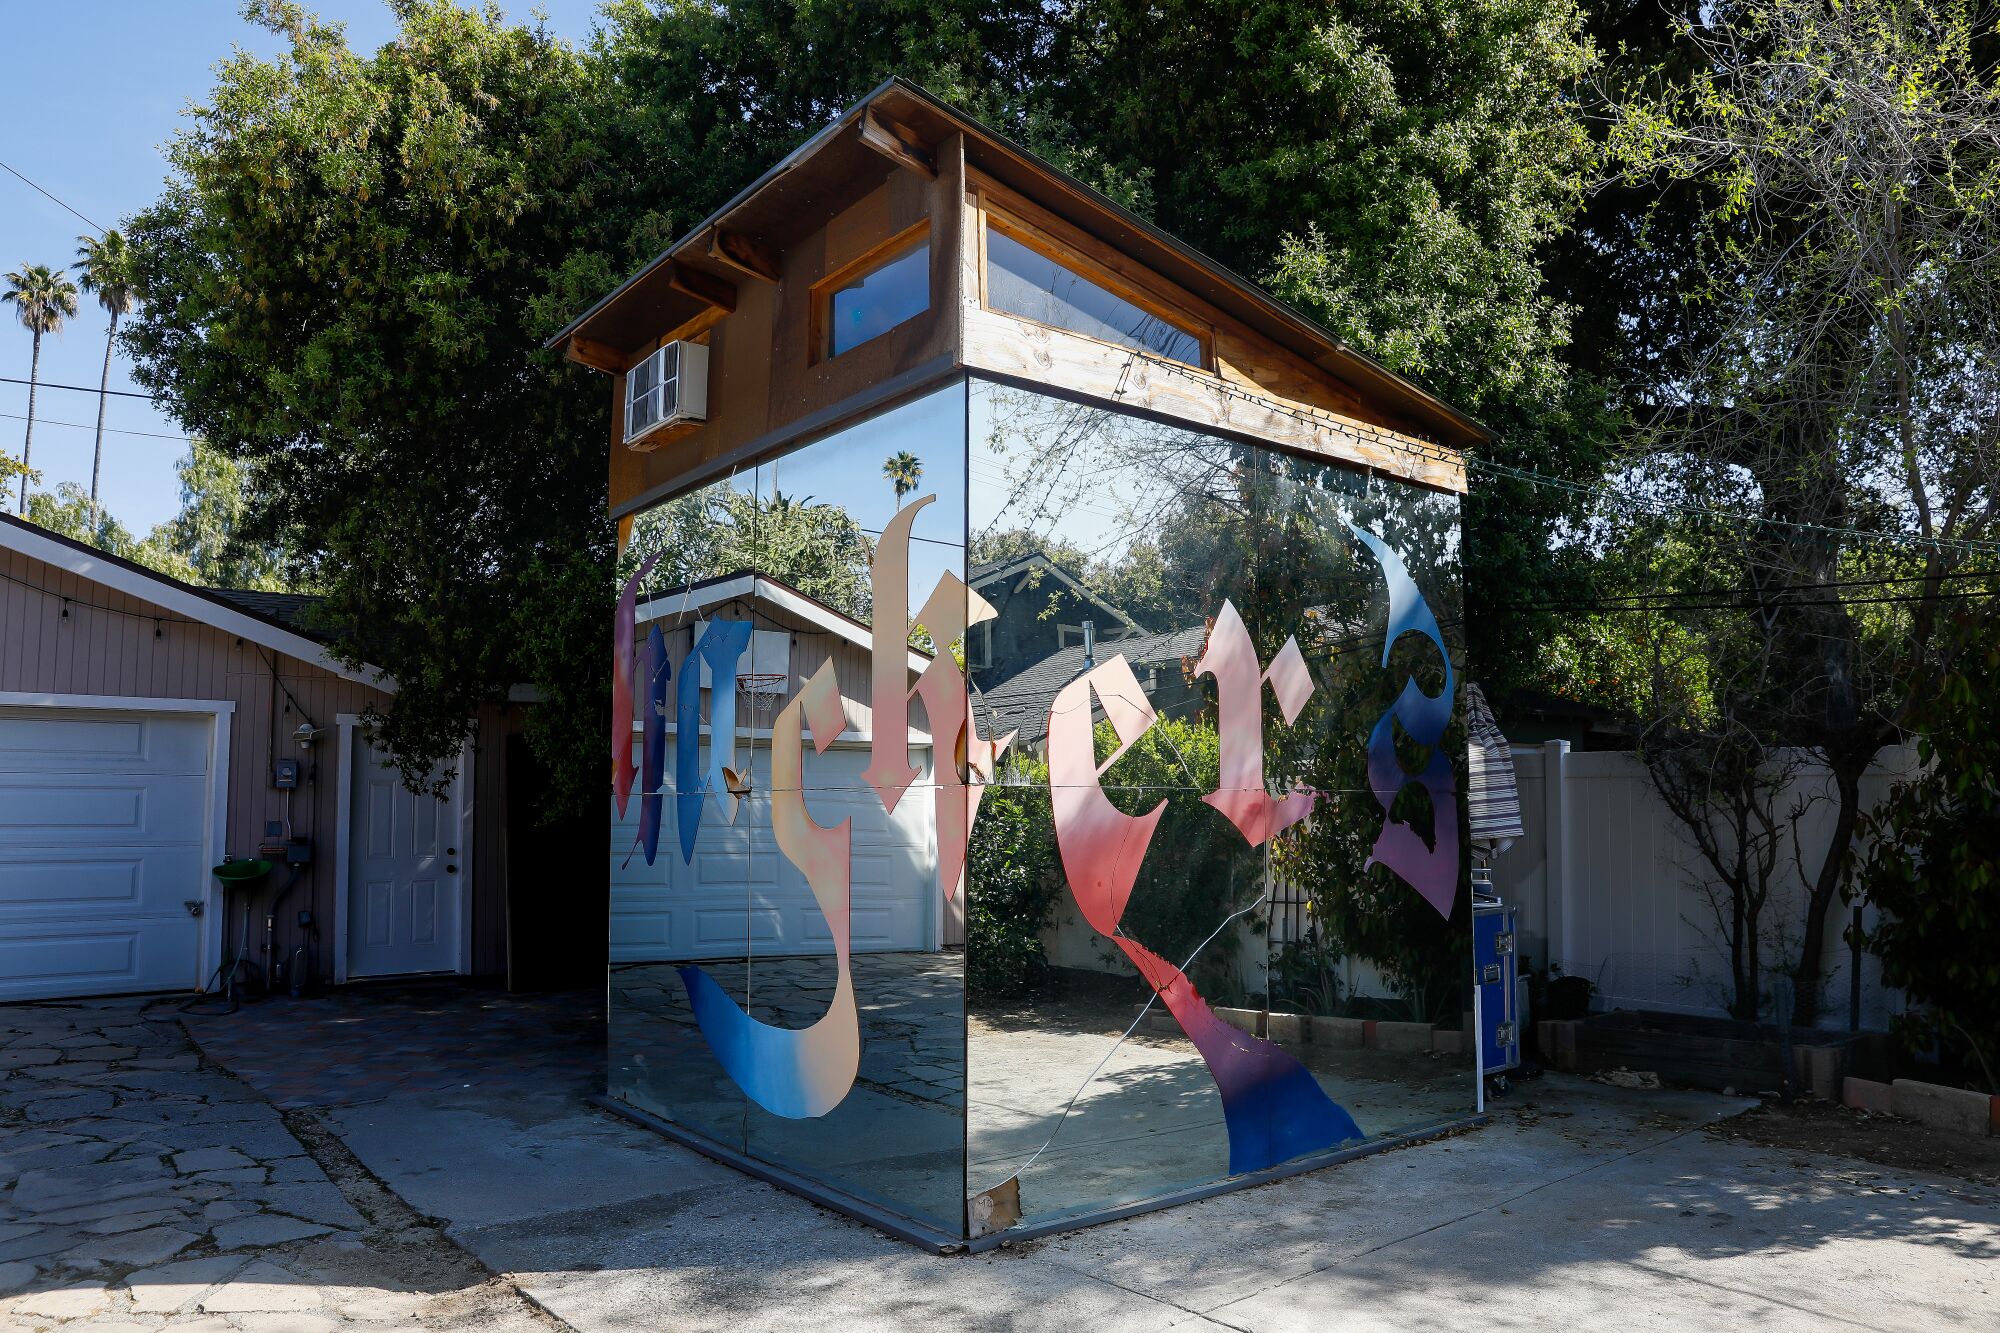 A view of a mirrored cube in a backyard in Pasadena. The facade has multicolored letters in Old English script.